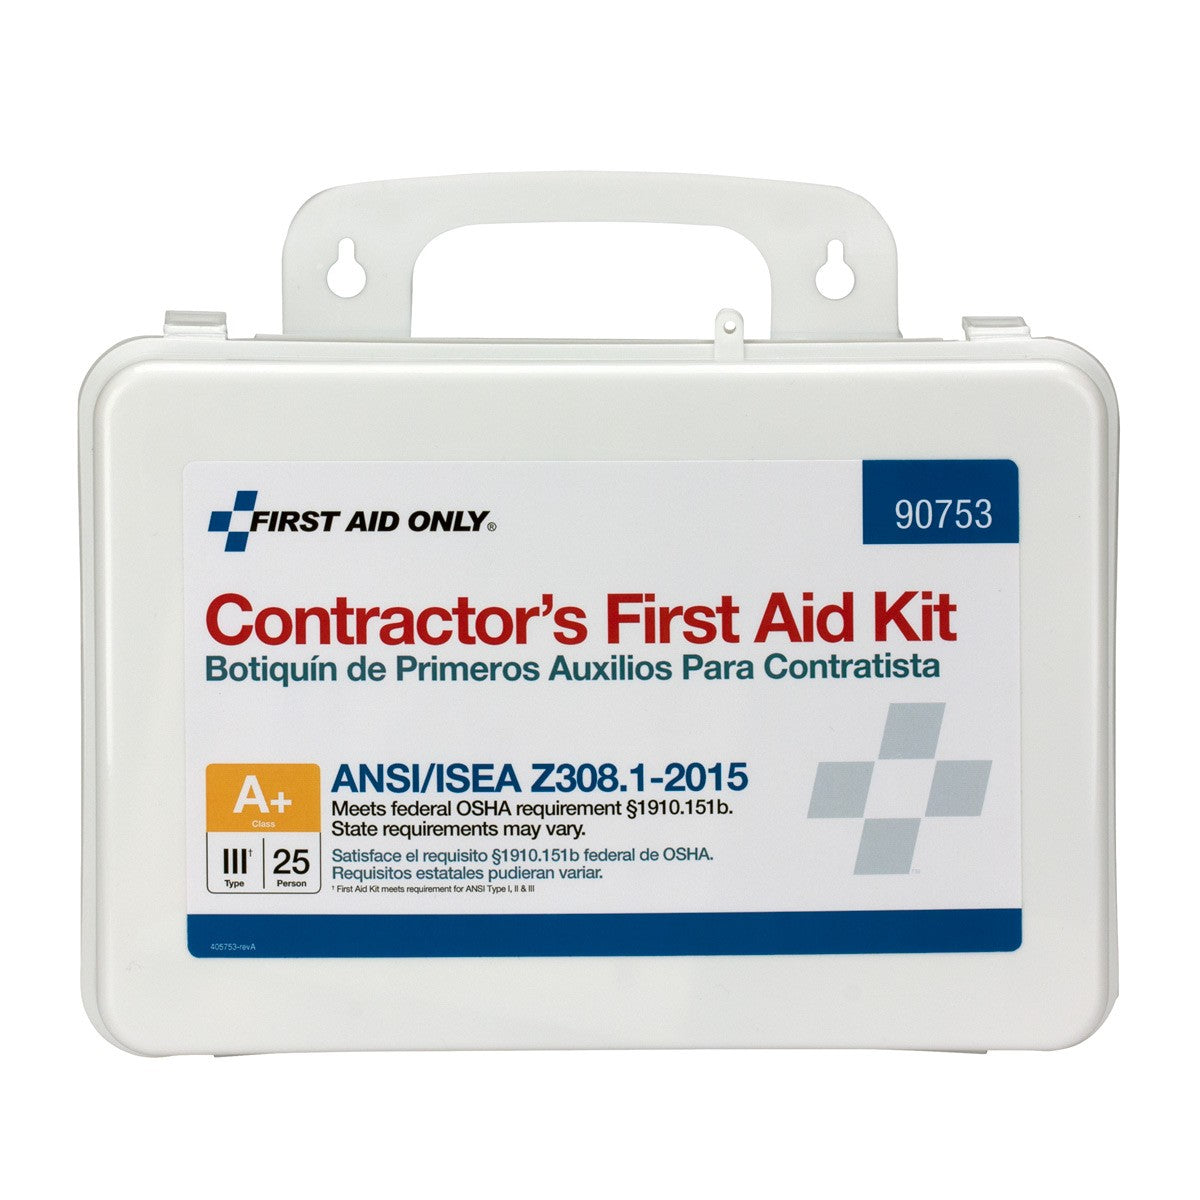 25 Person Contractor First Aid Kit, ANSI Compliant - W-90753